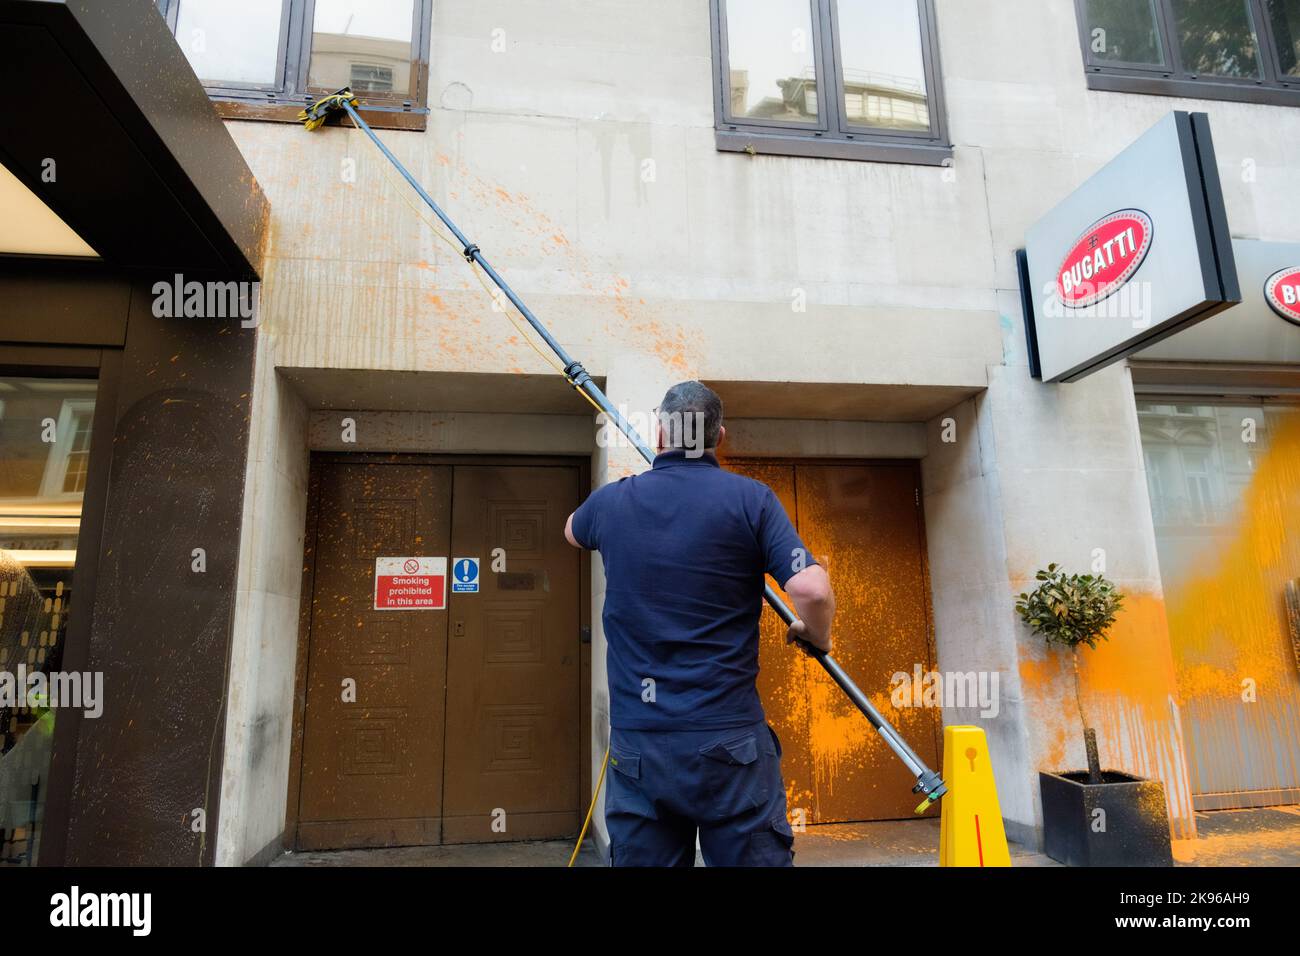 London, UK. 26 OCT 2022. A couple of Just Stop Oil activists spray-paint luxury car dealership in Mayfair. The climate protesters targeted H.R. Owen, Jack Barclay Bentley, and Ferrari Mayfair. Stock Photo